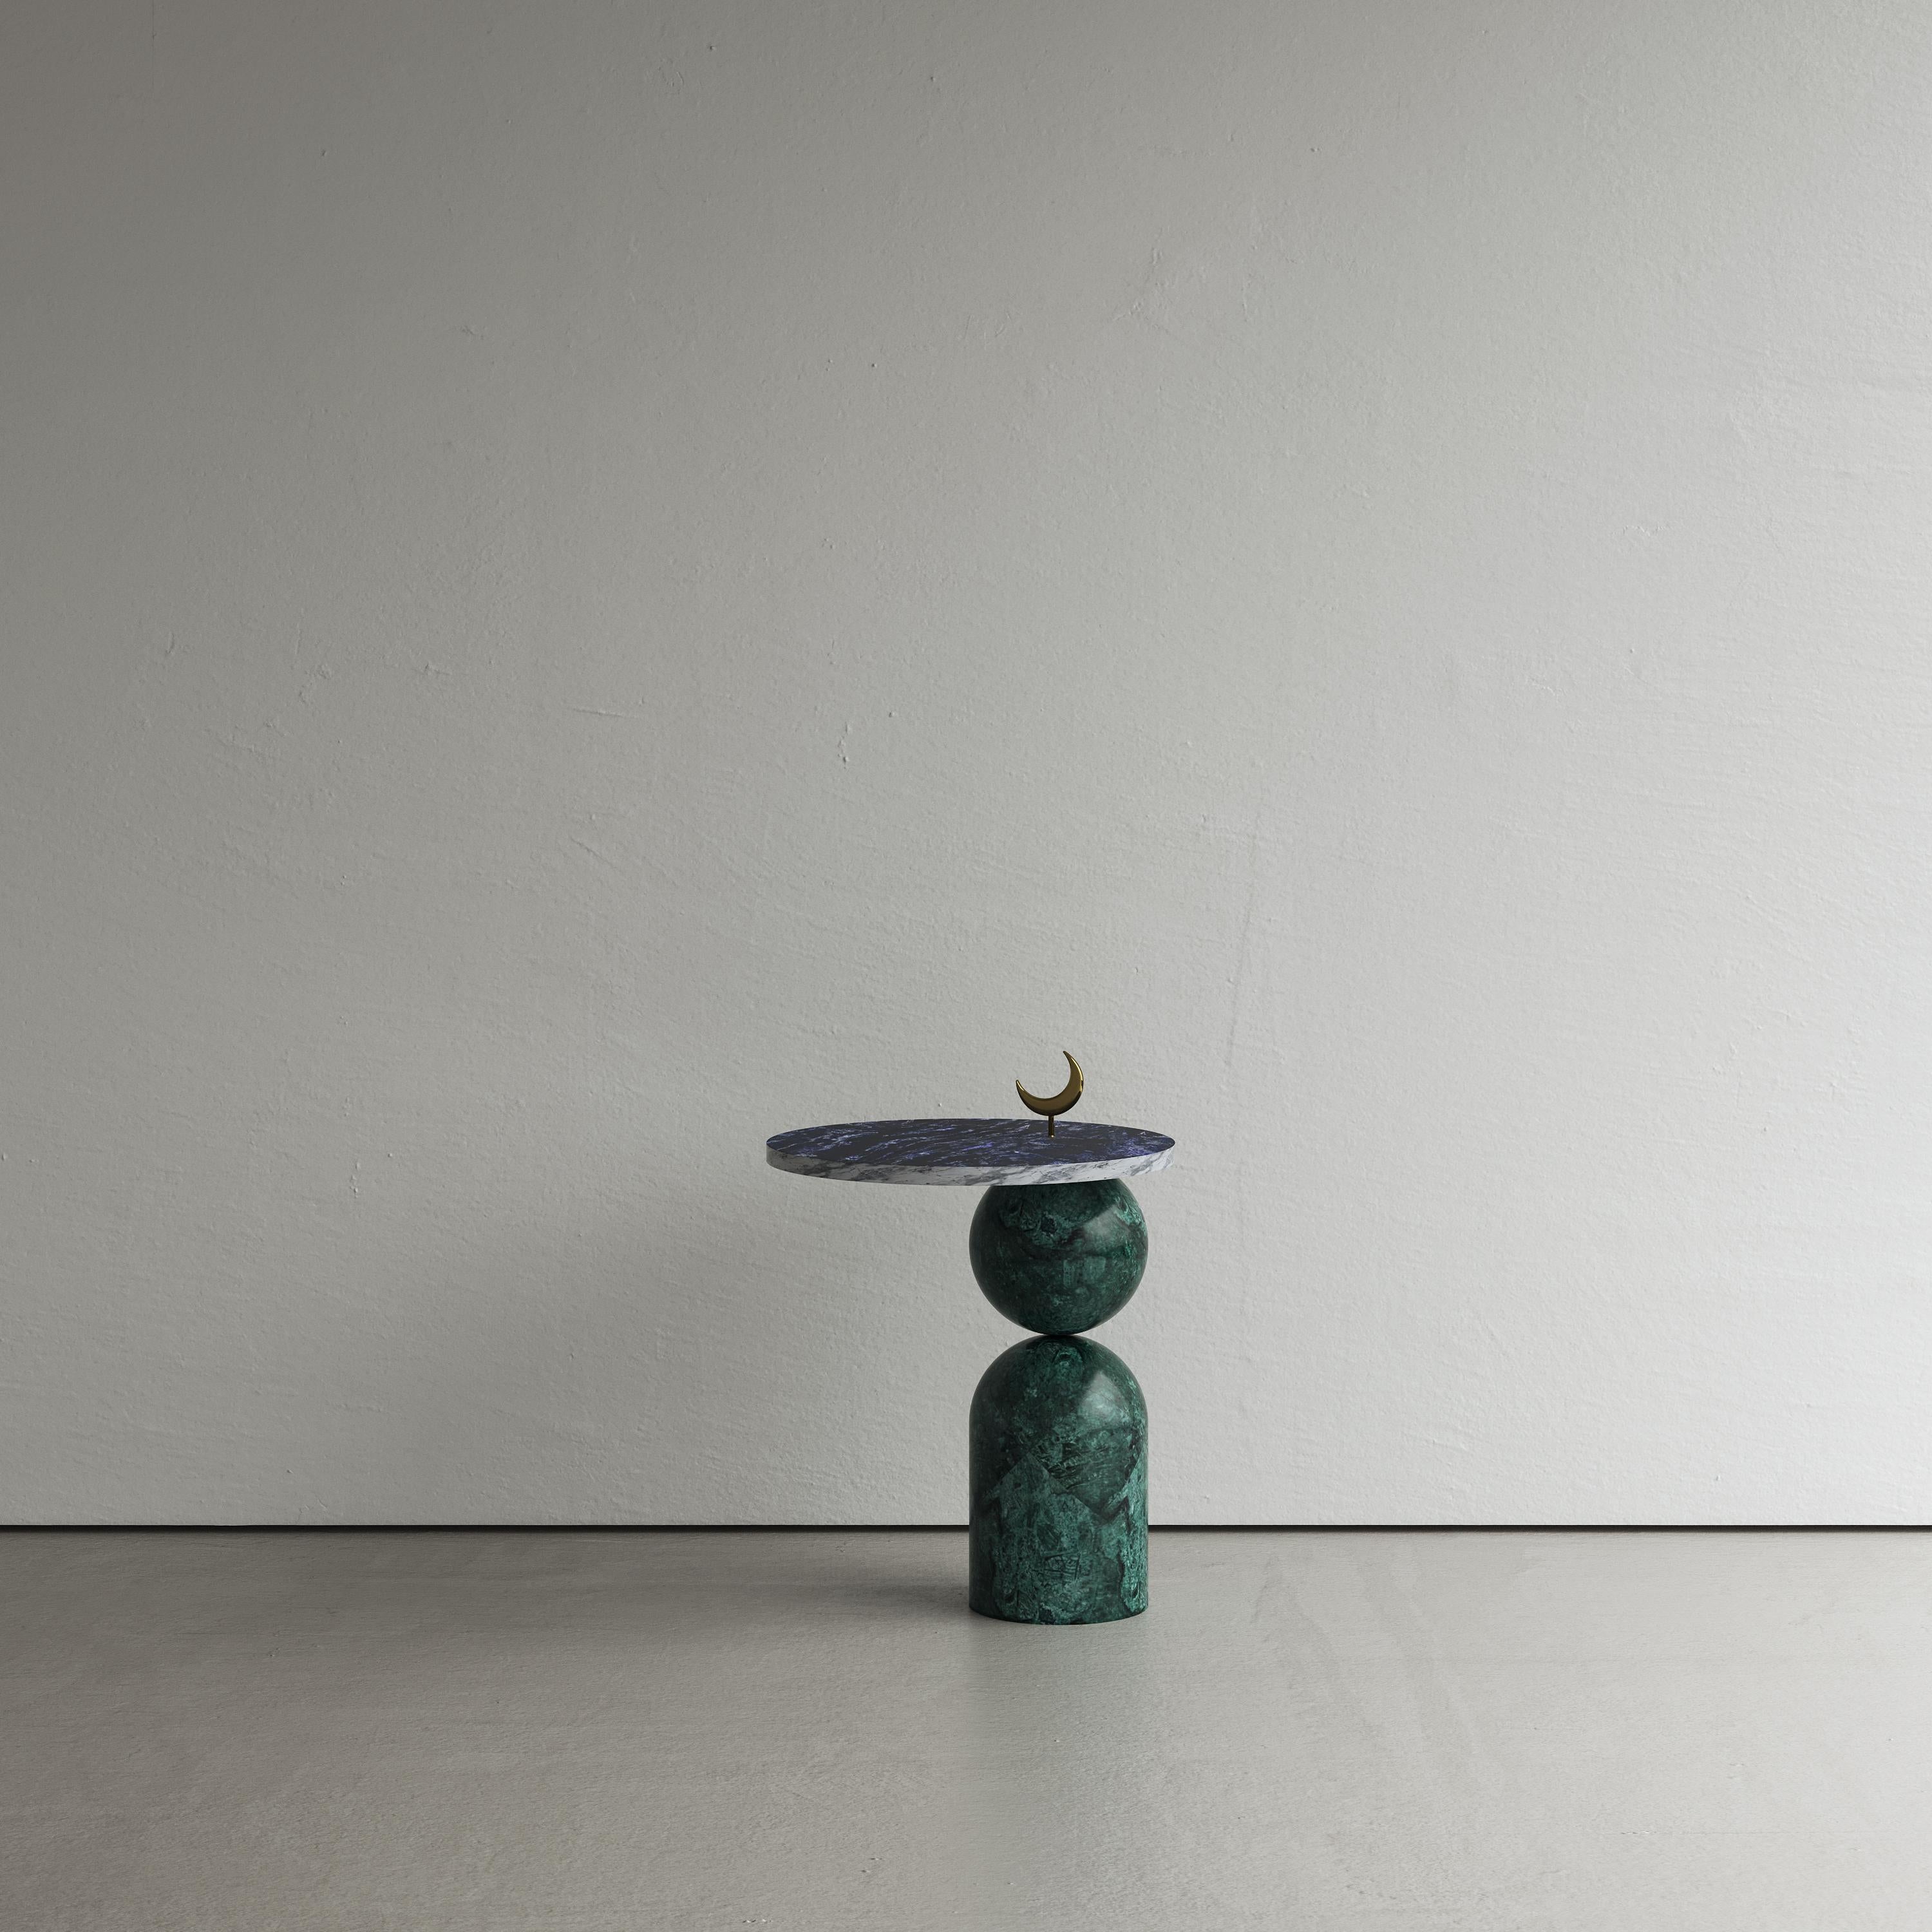 Mandacaru side table by Gabriela Campos
Dimensions: Ø 45 x H 50 cm.
Materials: Marble composition on emerald green, blue martinica and rafaello, Brass Sculpture.

The work “A Lua” (1928) by Tarsila do Amaral, purchased by MoMA in New York in